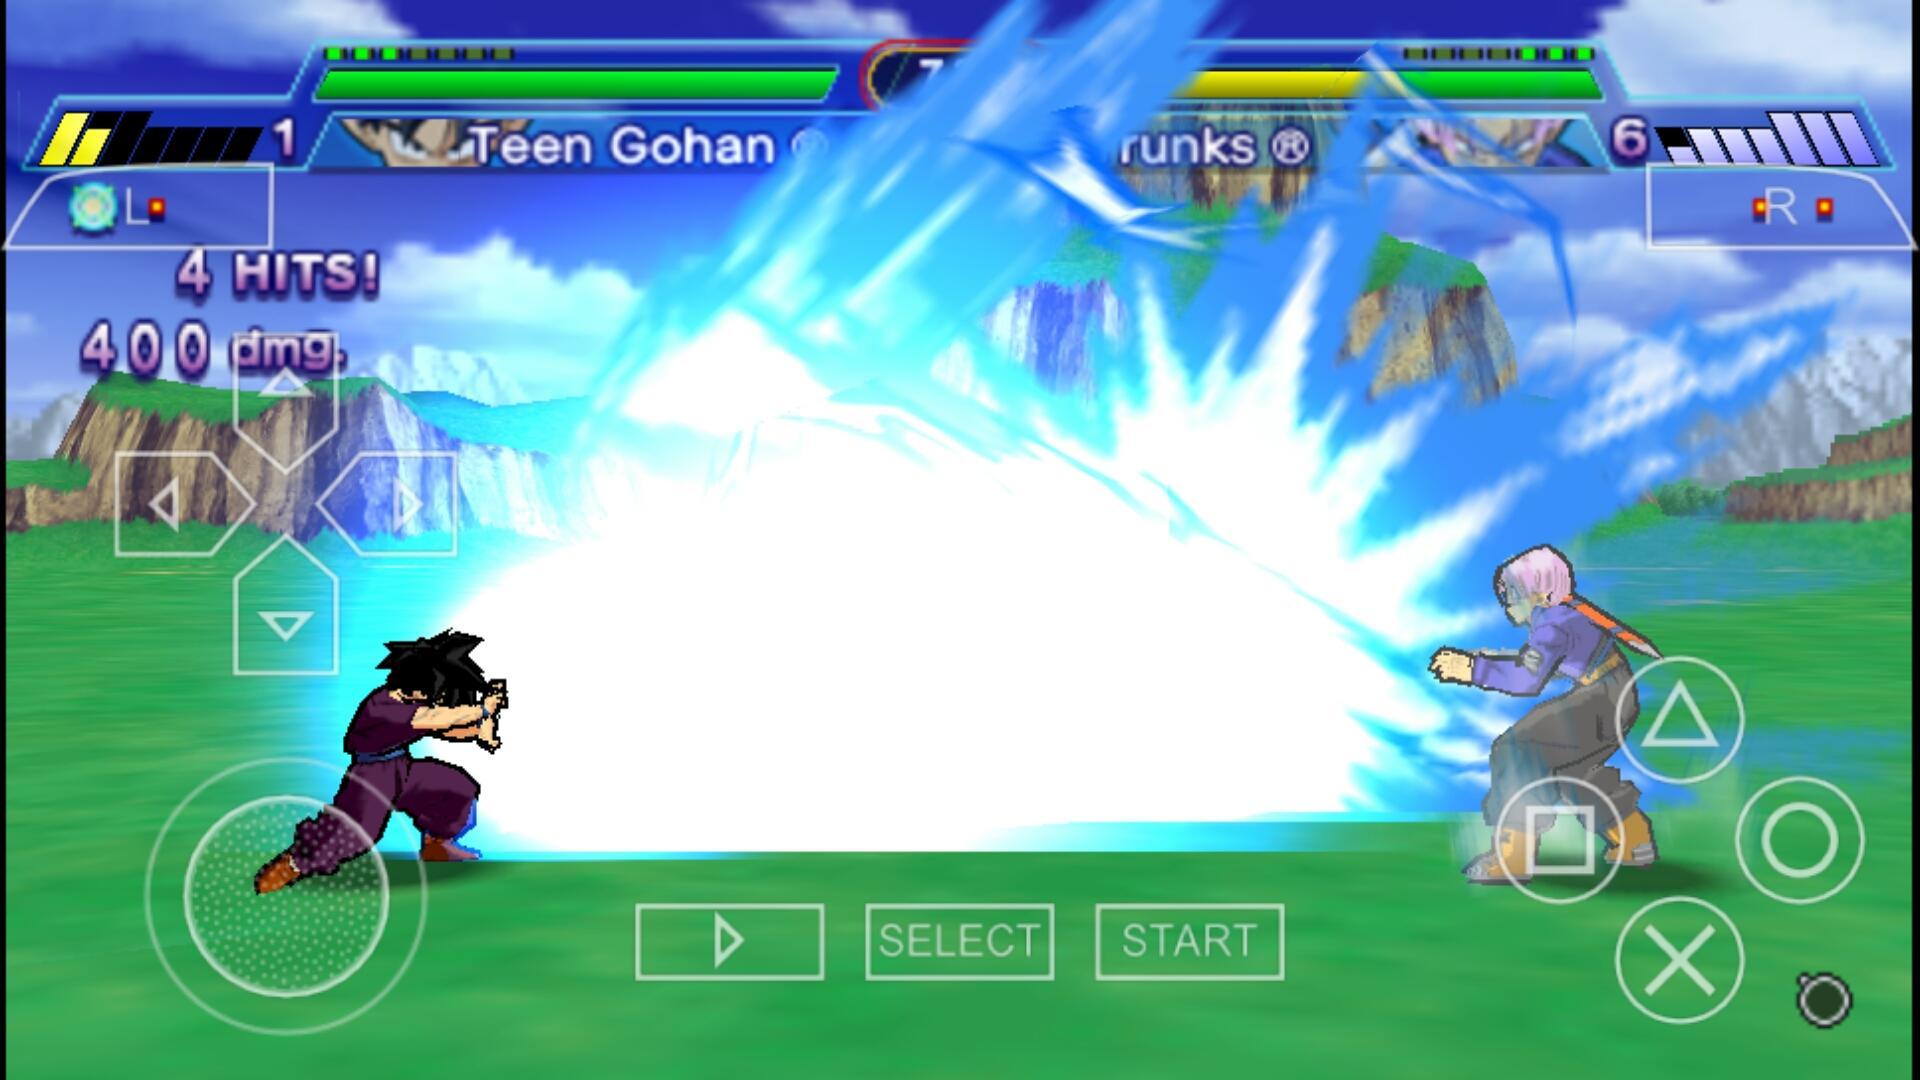 Dragon Ball Z Ultimate Tenkaichi Ultra Instrinct APK 1.0.0 for Android –  Download Dragon Ball Z Ultimate Tenkaichi Ultra Instrinct XAPK (APK + OBB  Data) Latest Version from